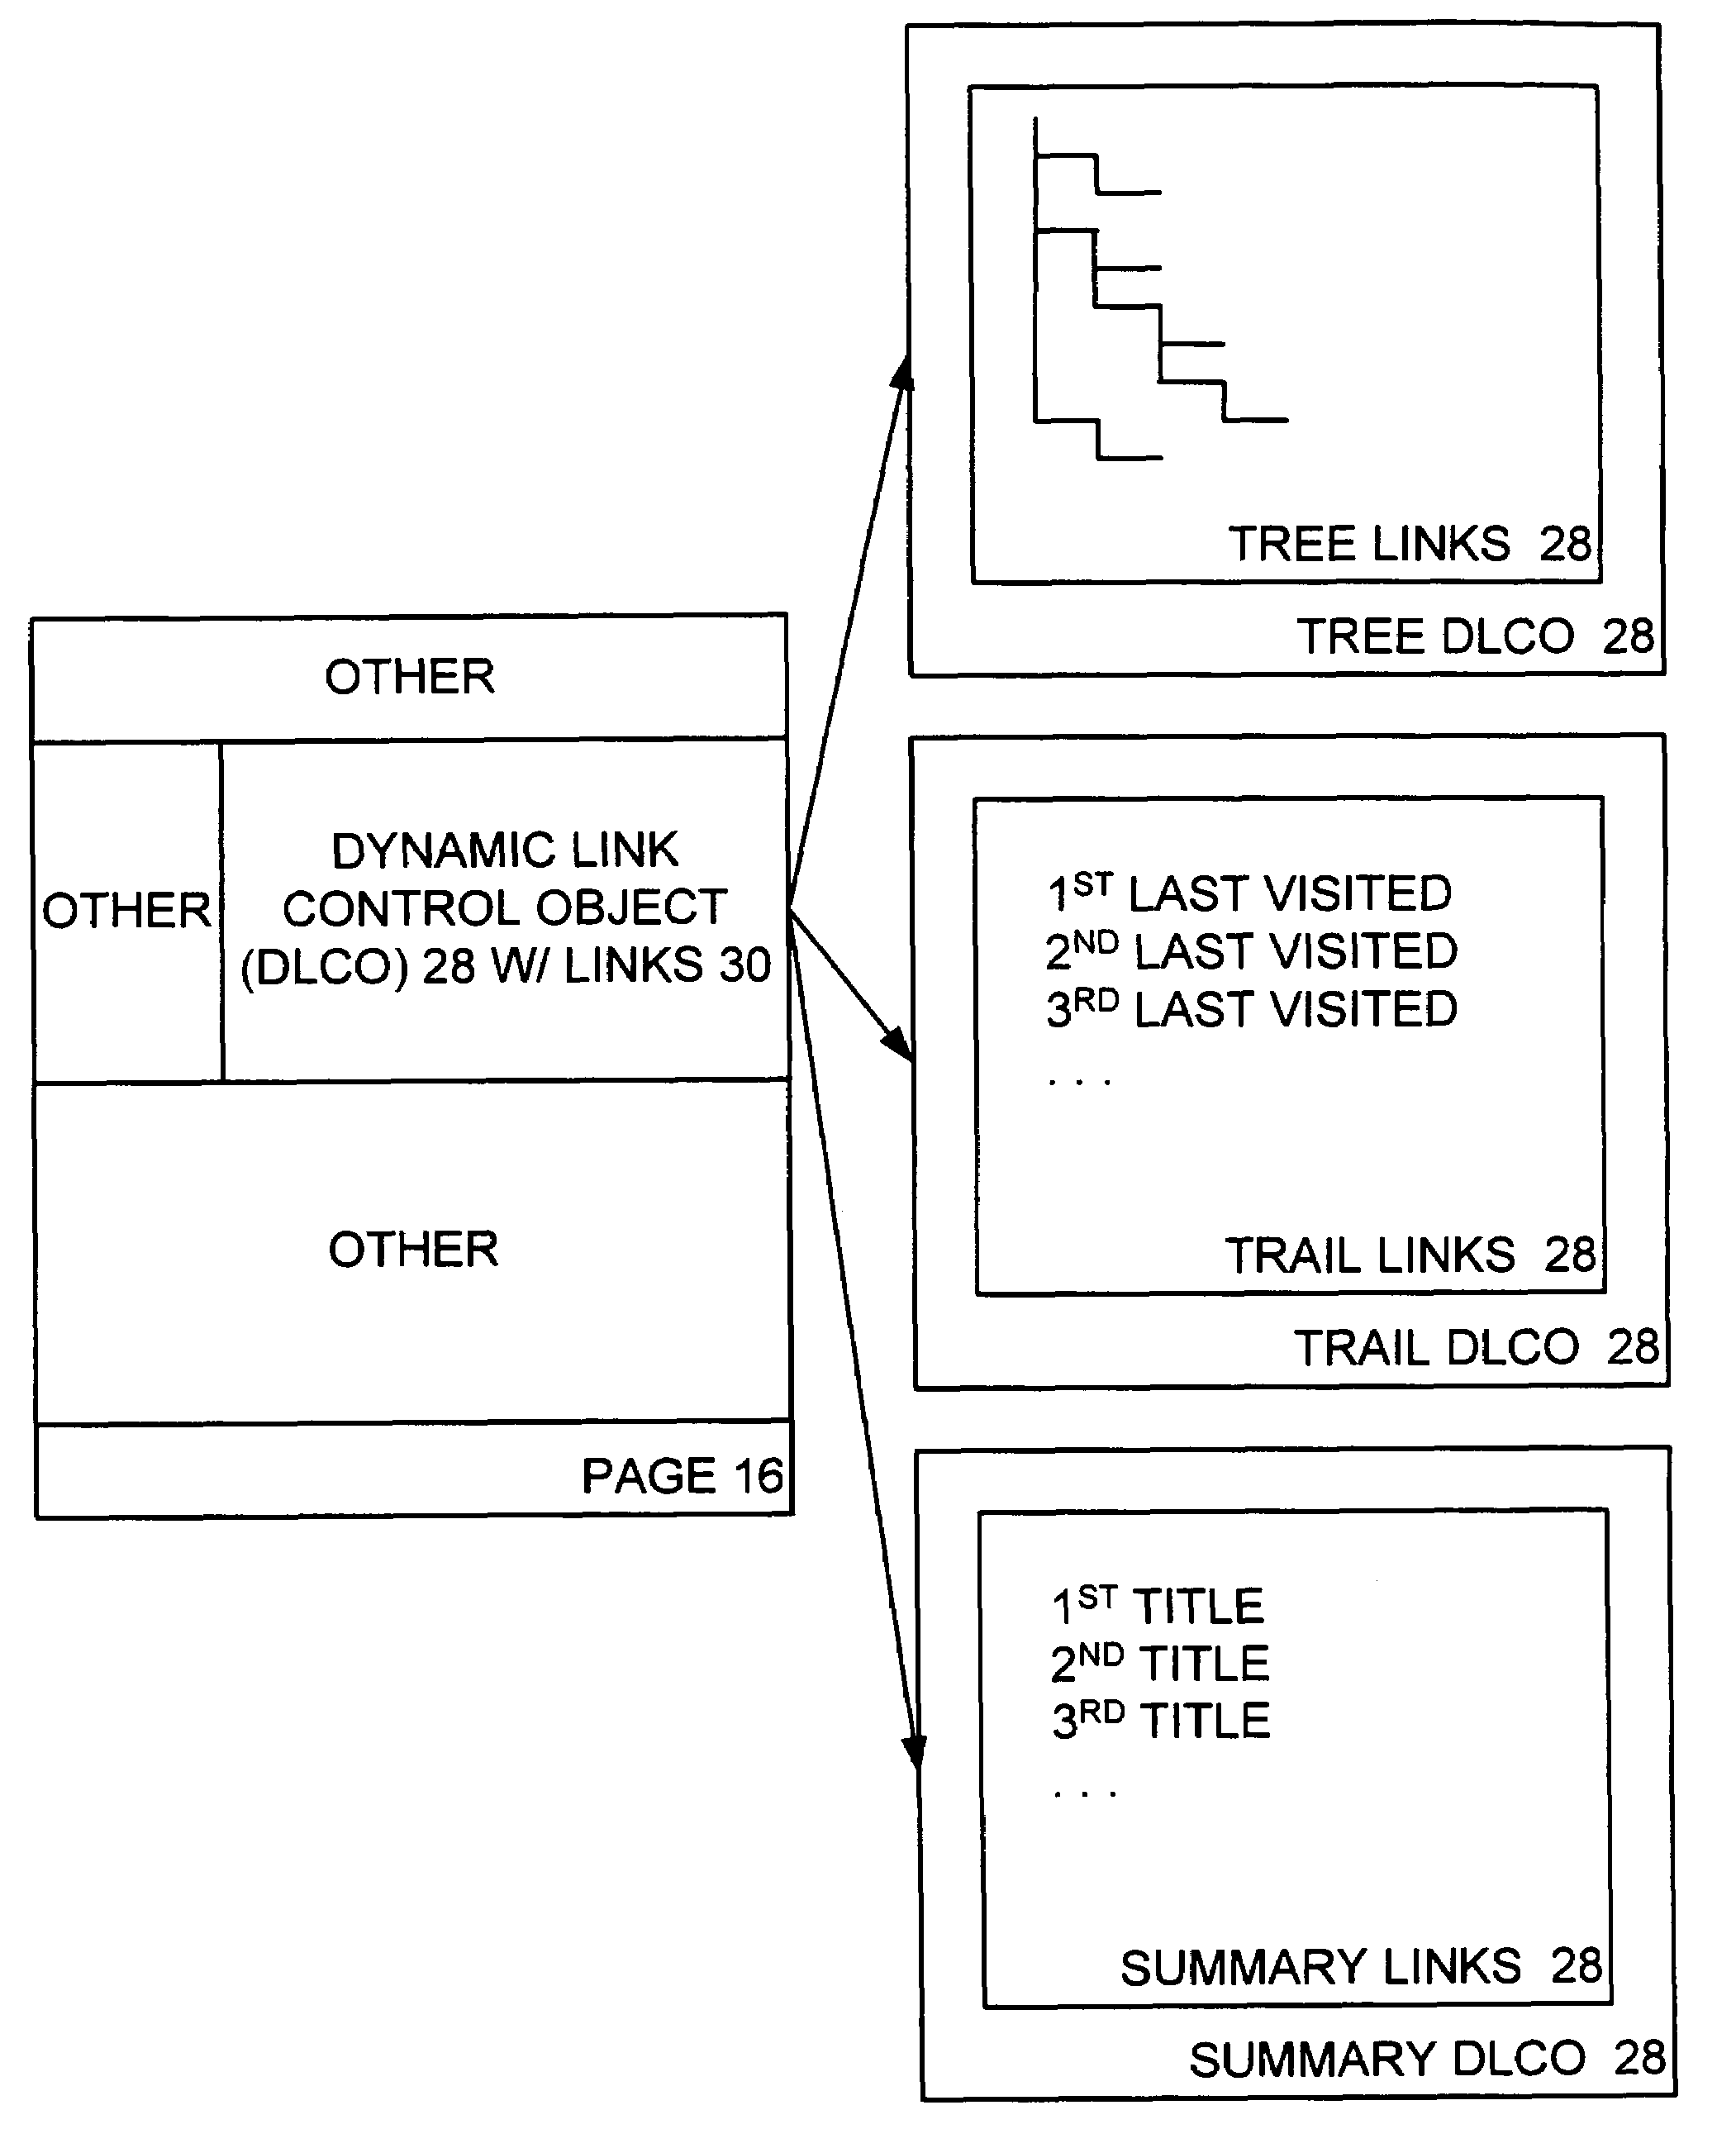 Dynamic link control object for dynamically presenting link options in connection with a content management server system